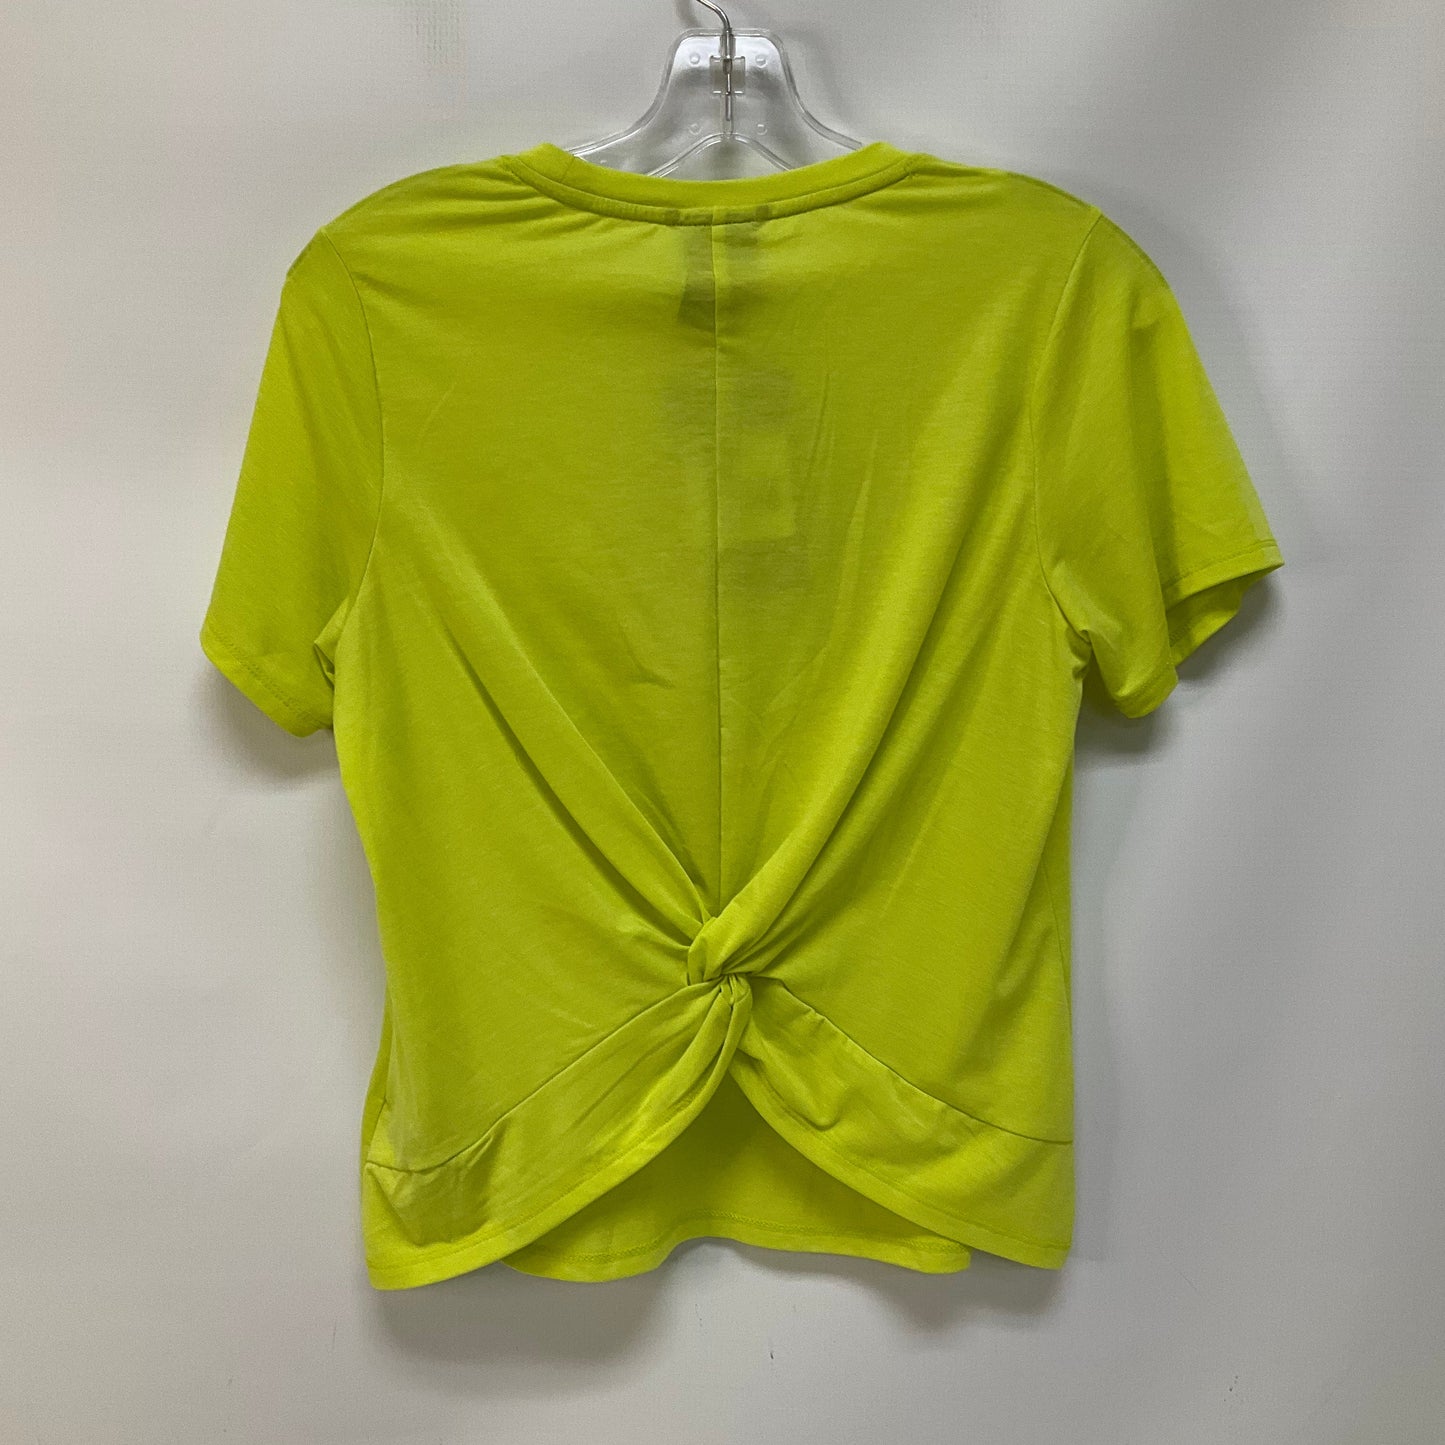 Athletic Top Short Sleeve By The North Face  Size: S